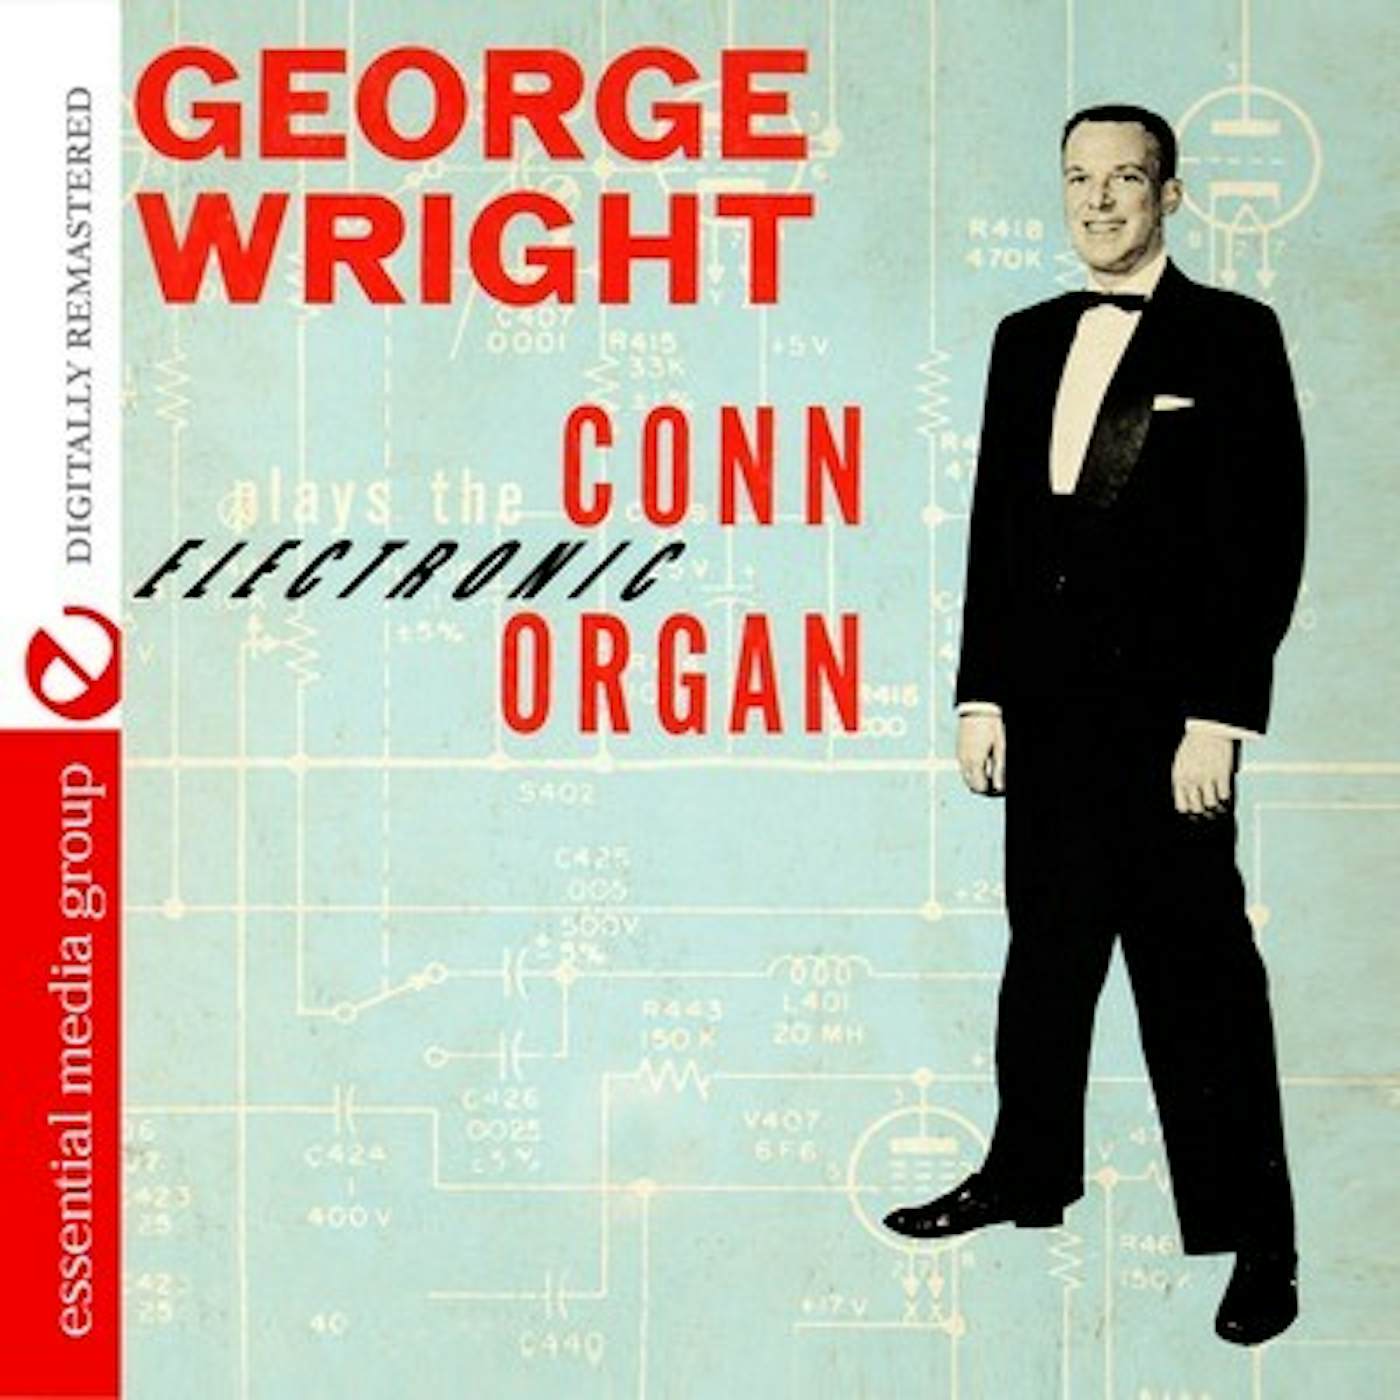 George Wright PLAYS THE CONN ELECTRONIC ORGAN CD